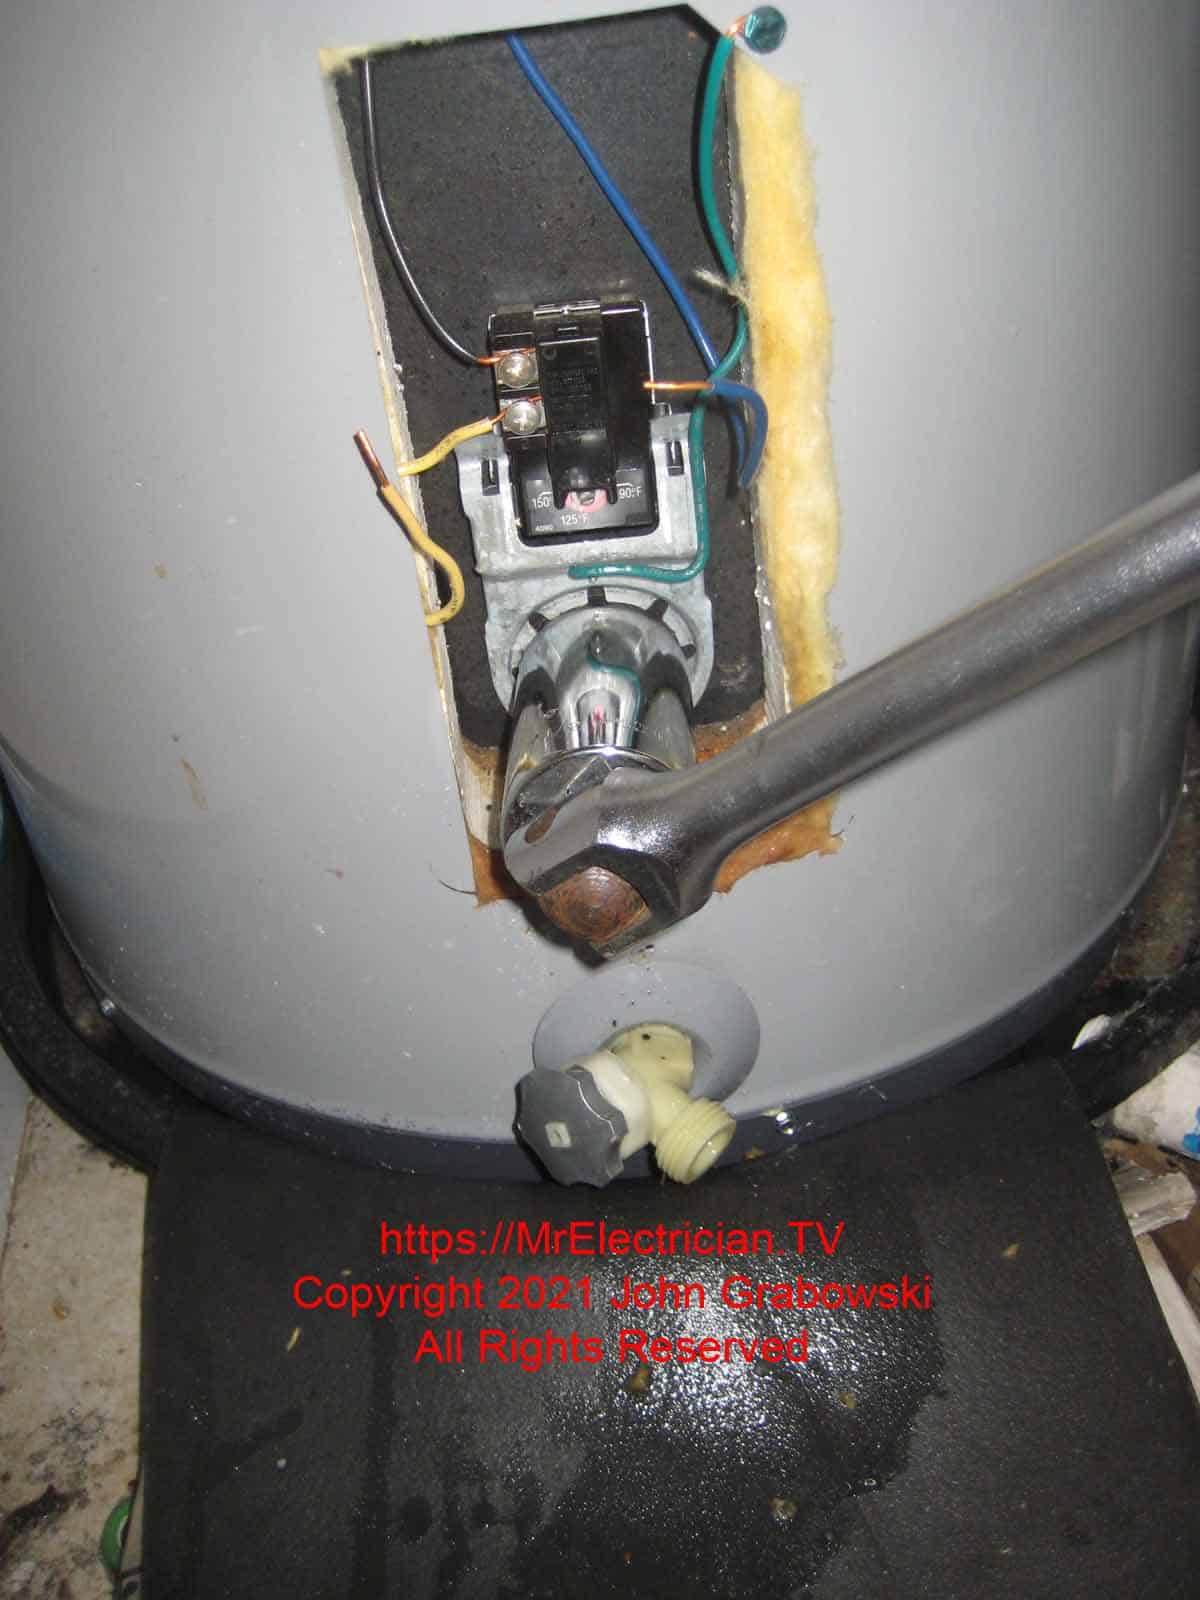 Using a breaker bar and hex socket to remove an electric water heater heating element